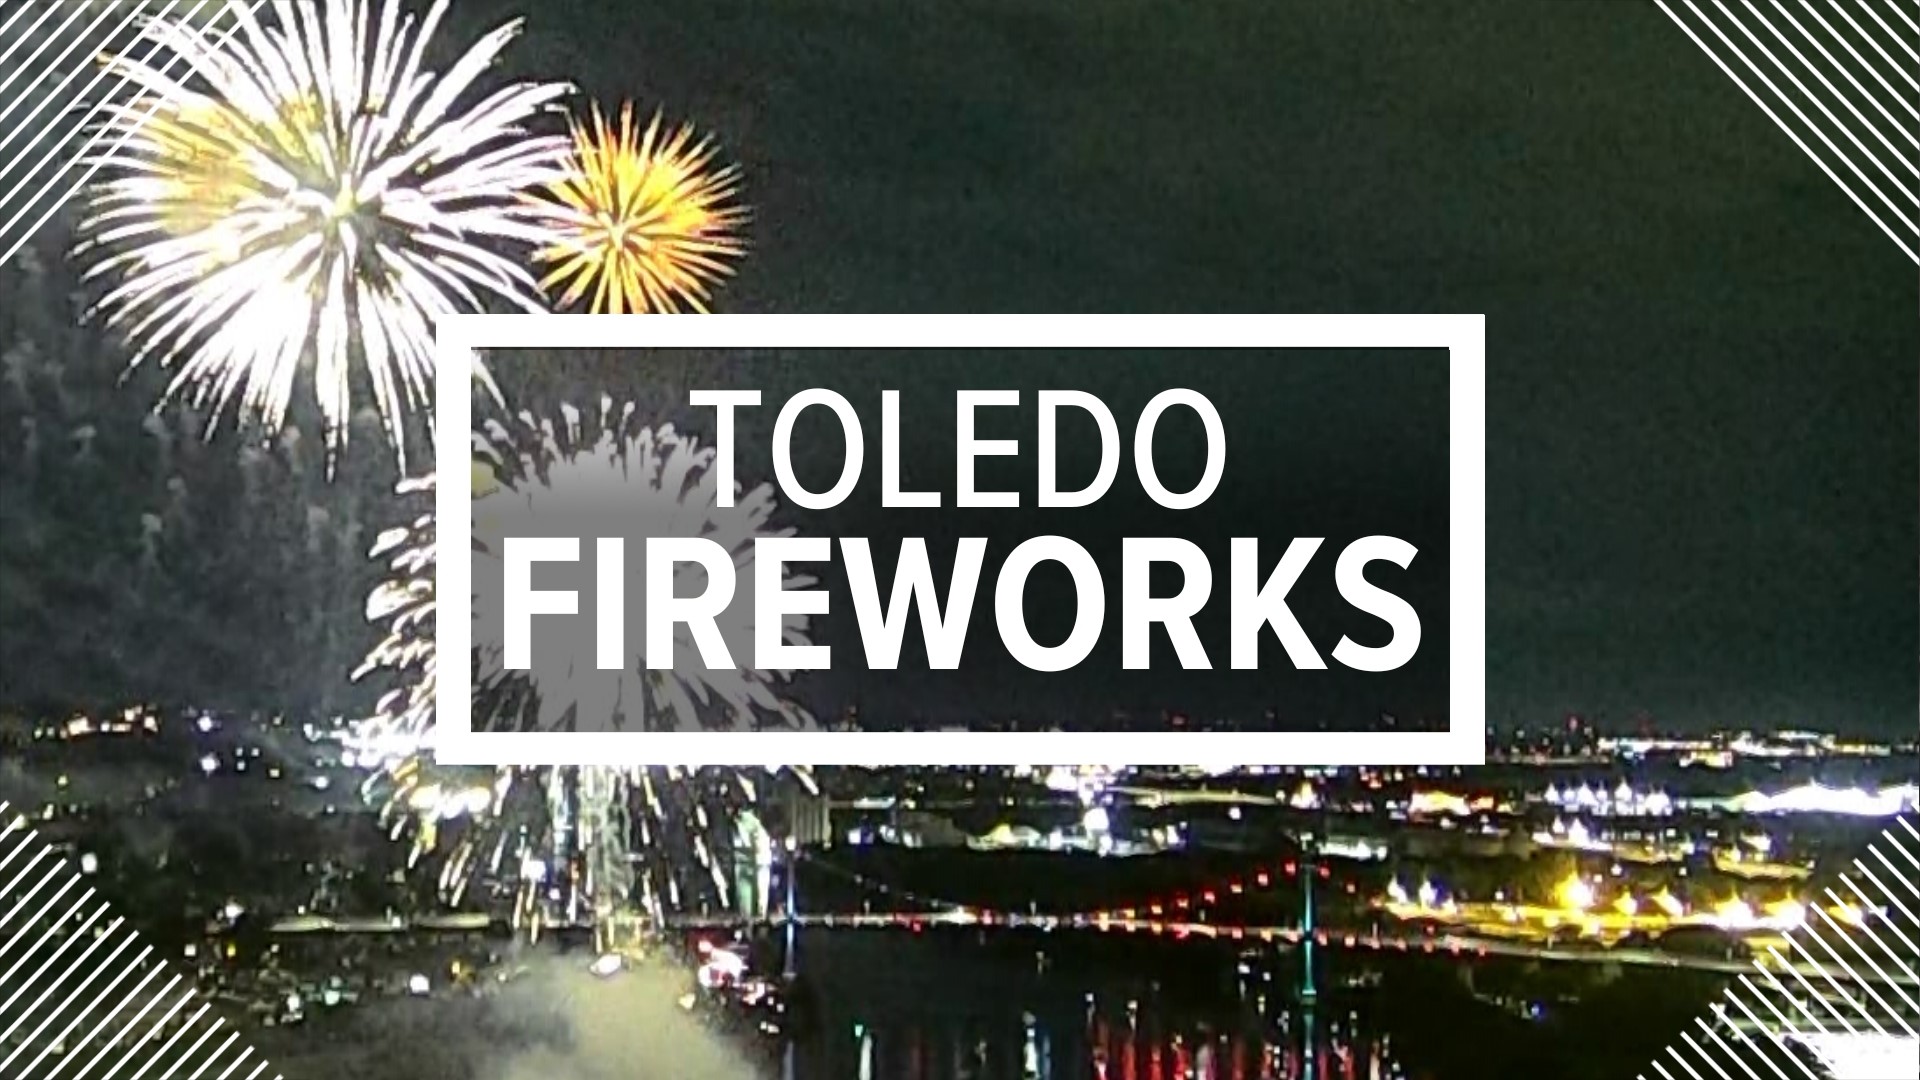 The city of Toledo set off its annual fireworks display Saturday, July 1, along the Maumee River.